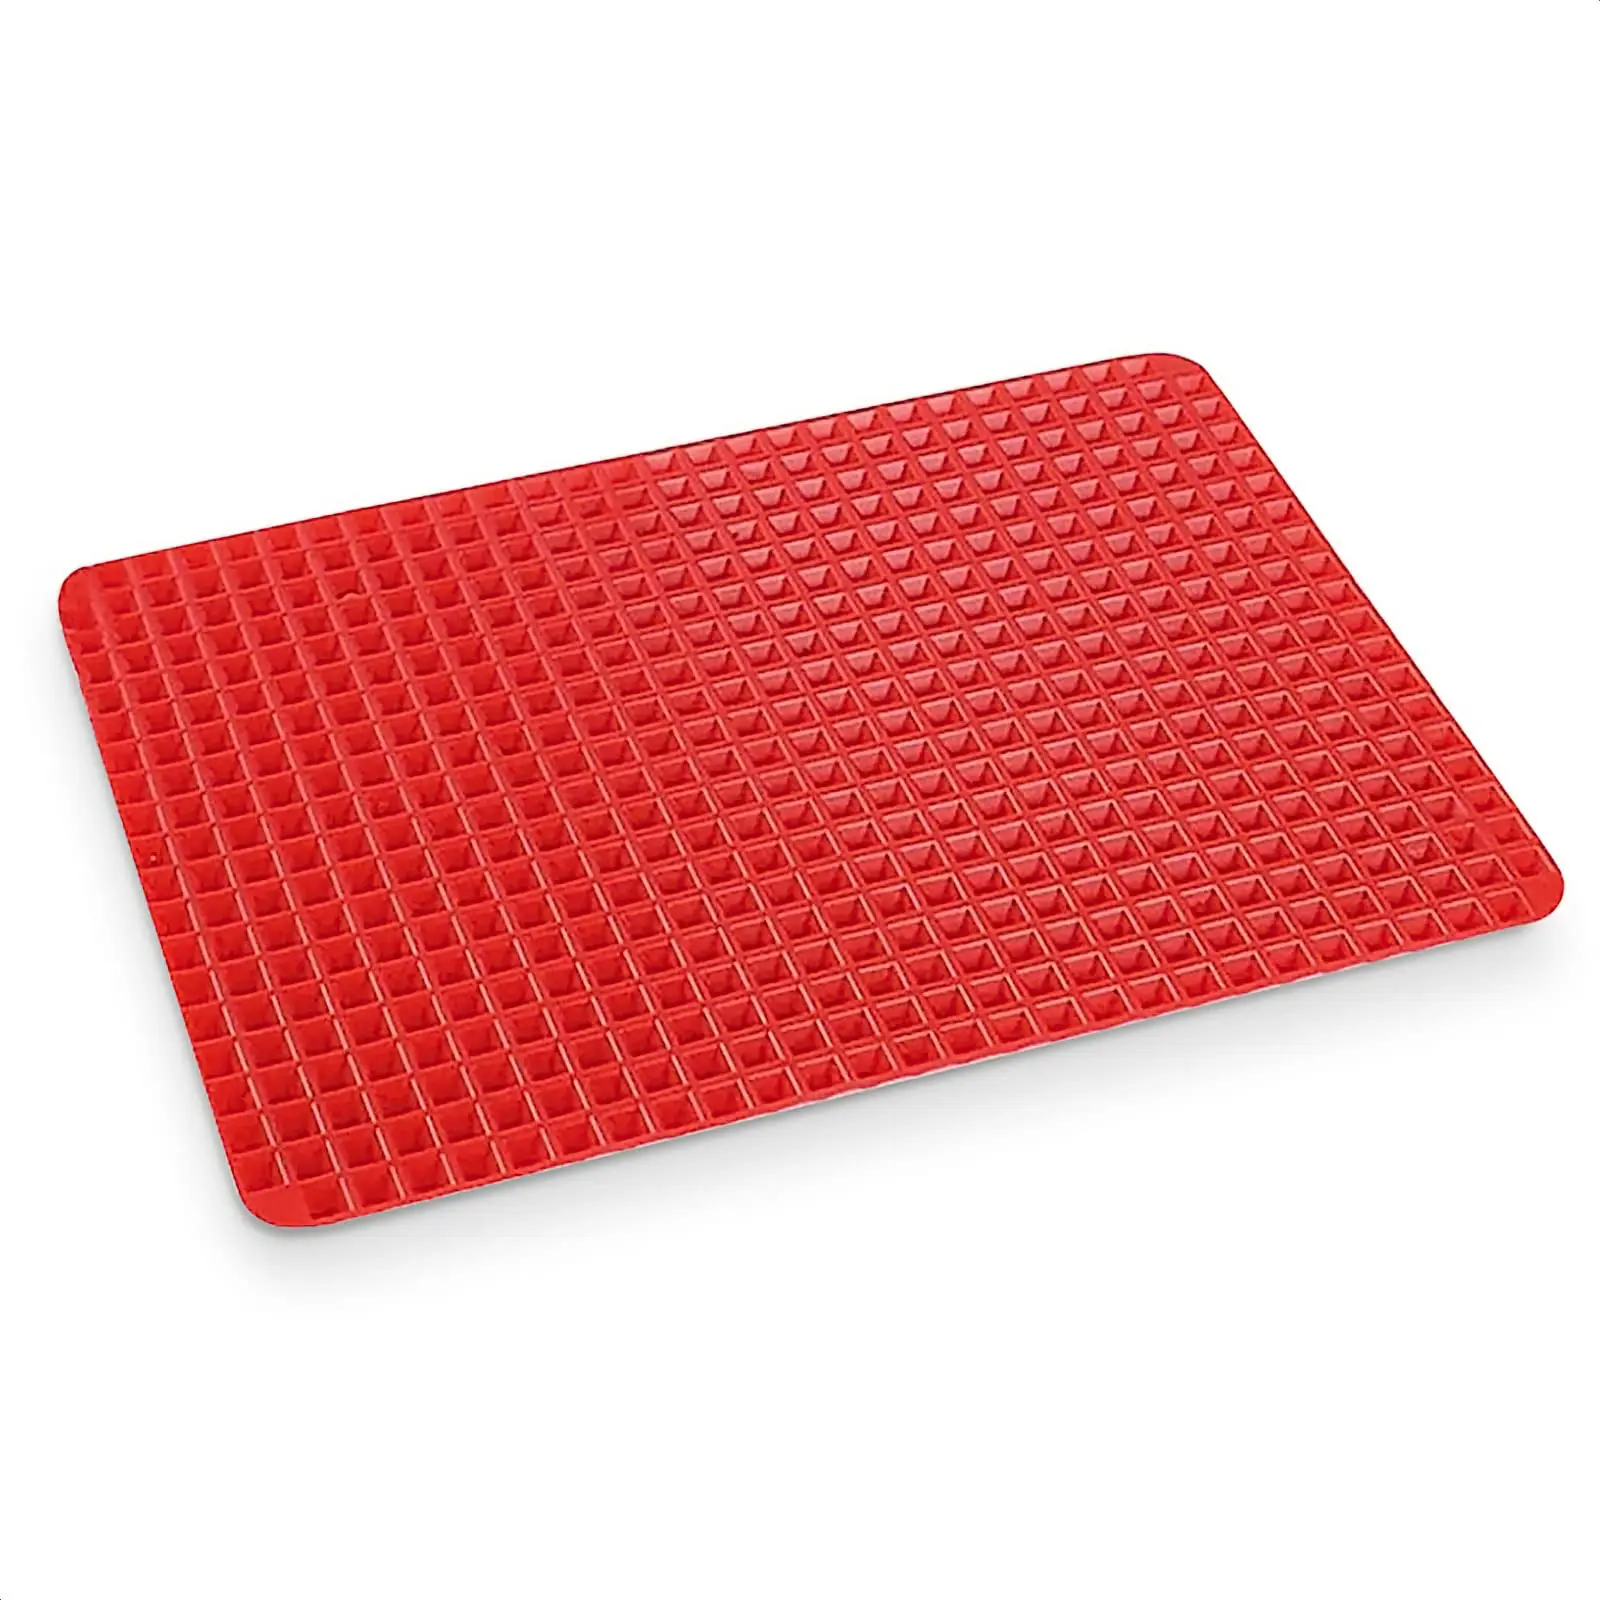 https://ae01.alicdn.com/kf/Abfc50dbf94f44200a899e8e953f09afbY/Silicone-Cooking-Mat-Pyramid-Sheets-Non-Stick-Baking-Cooking-Mat-Microwave-Oven-Tray-Baking-Sheet-Pastry.jpg